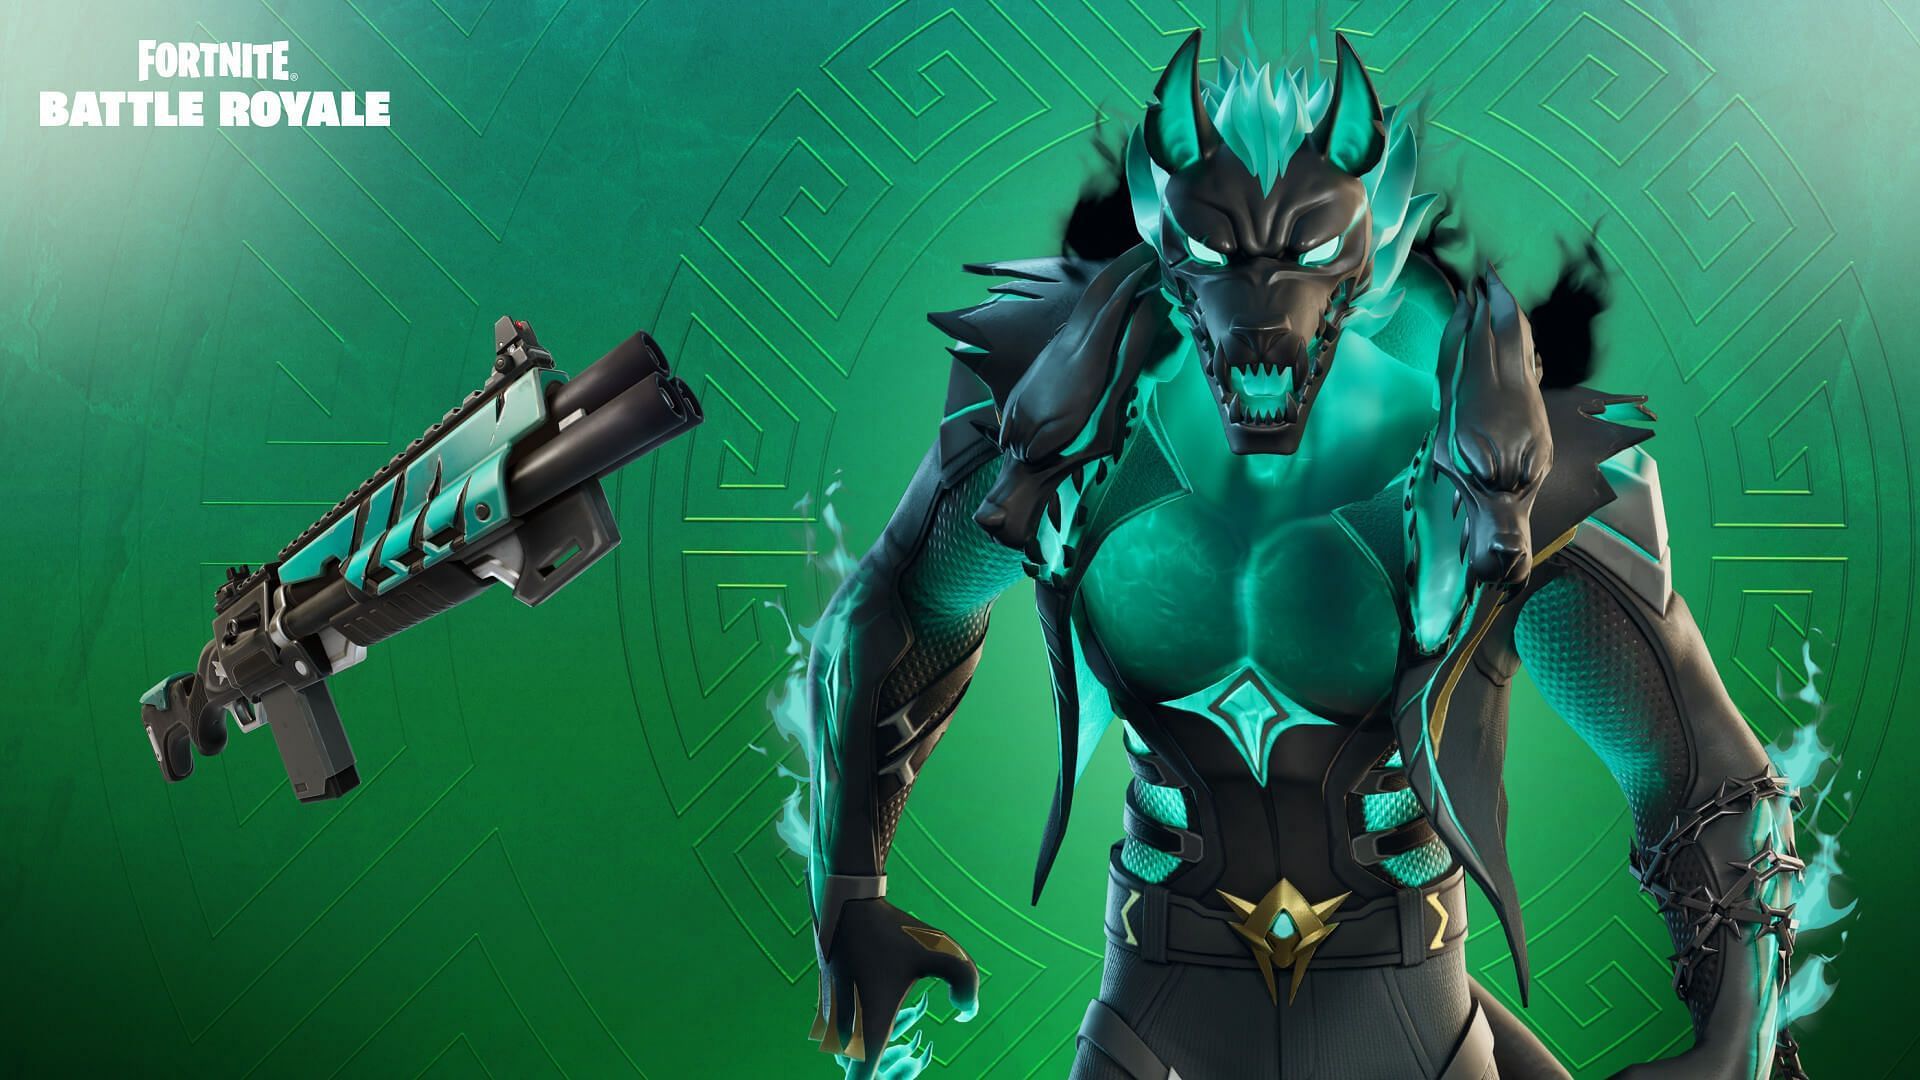 Cerberus might be lurking on the island (Image via Epic Games/Fortnite)